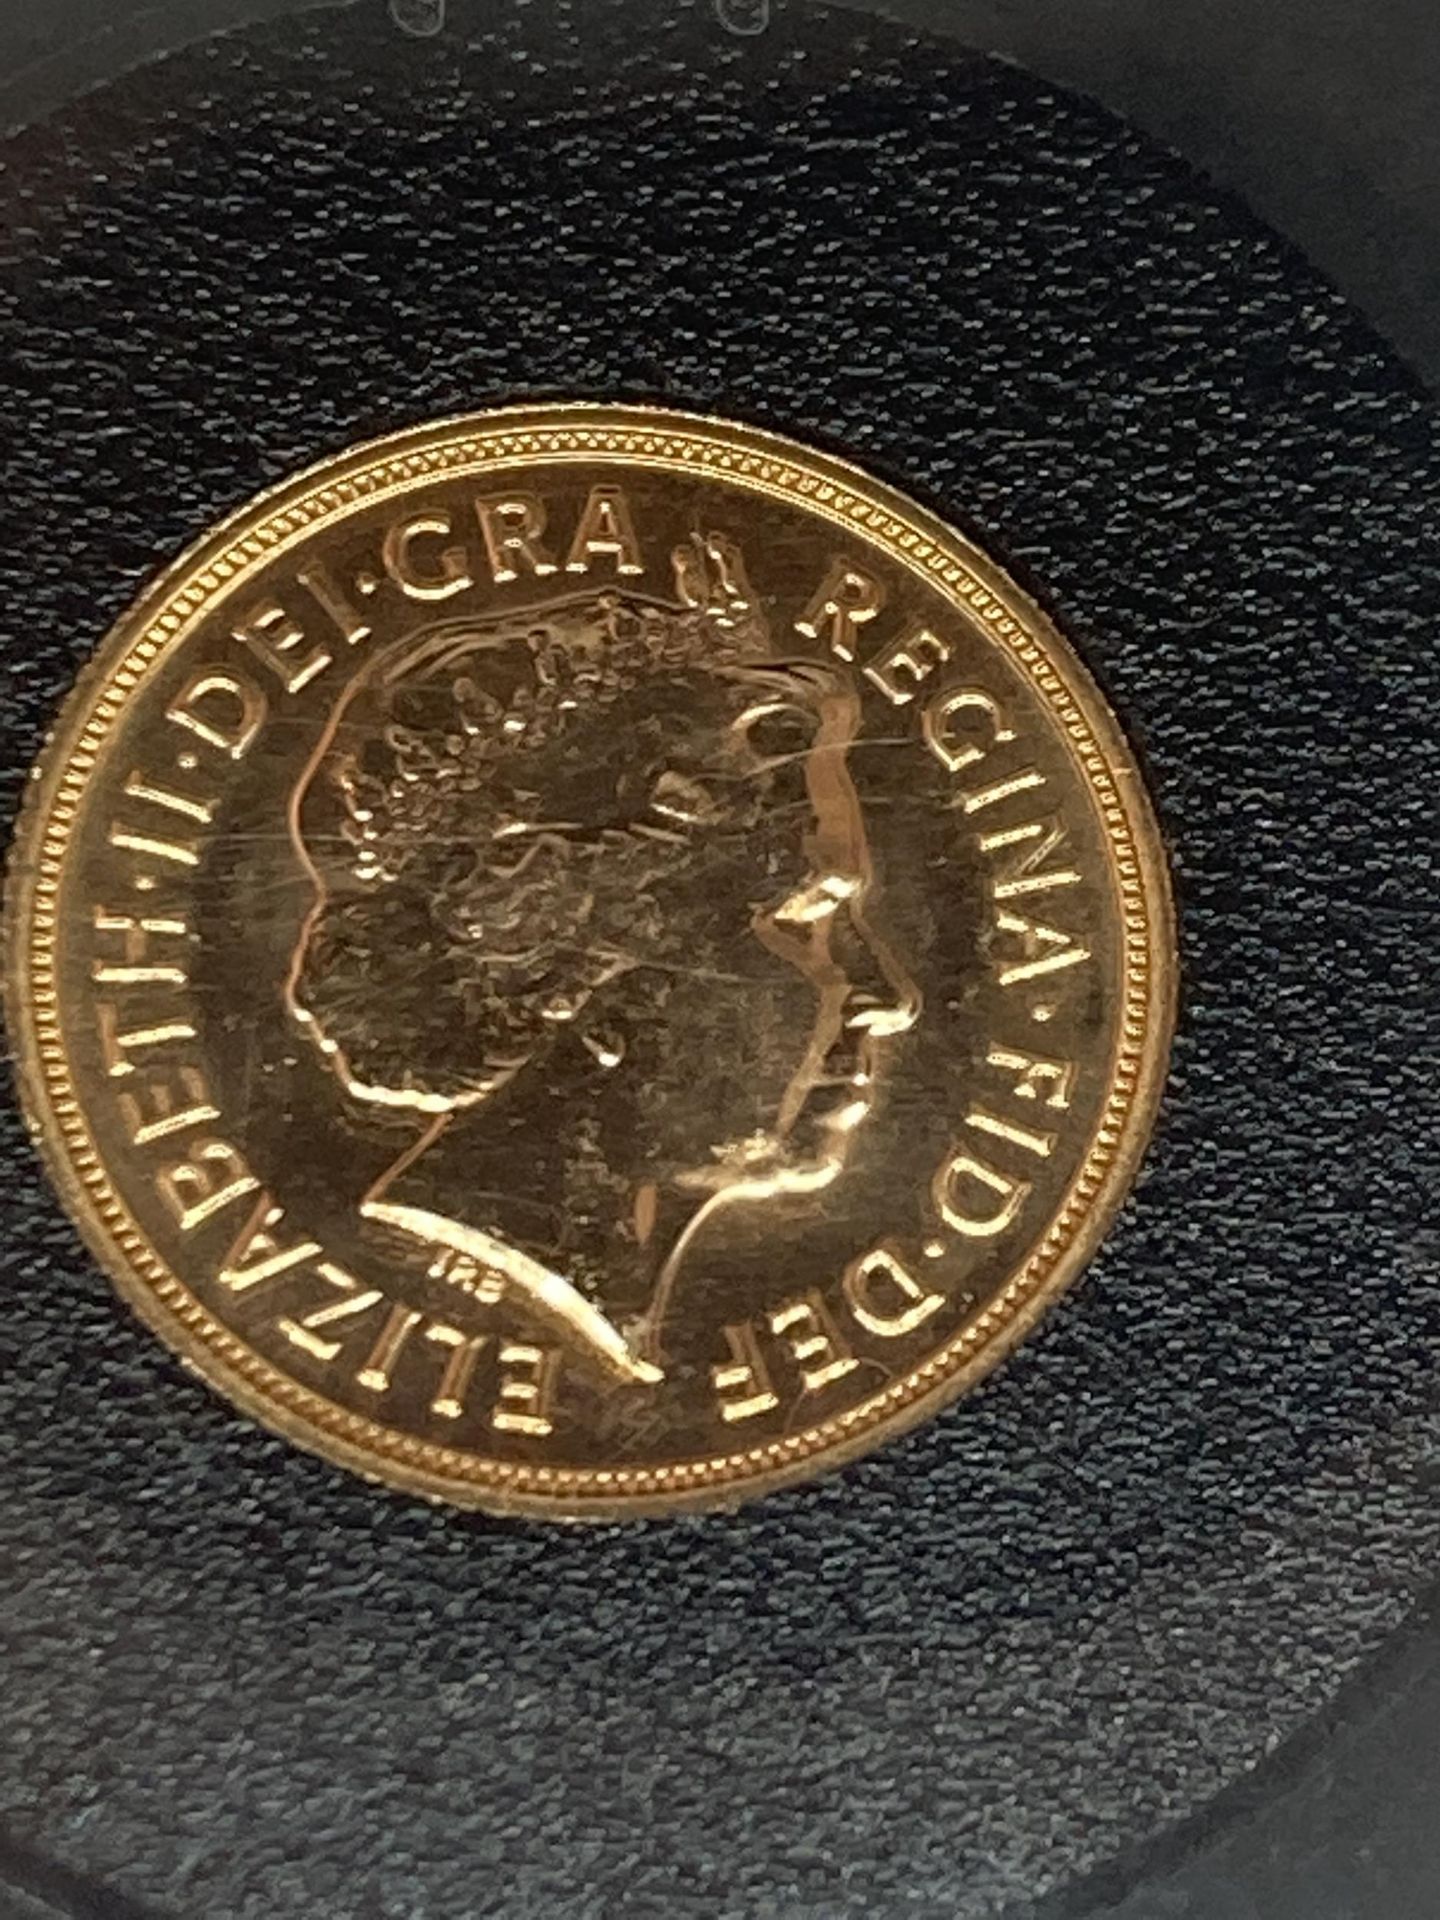 A CASED UNCIRCULATED GOLD SOVEREIGN DATED 2018 - Image 3 of 3